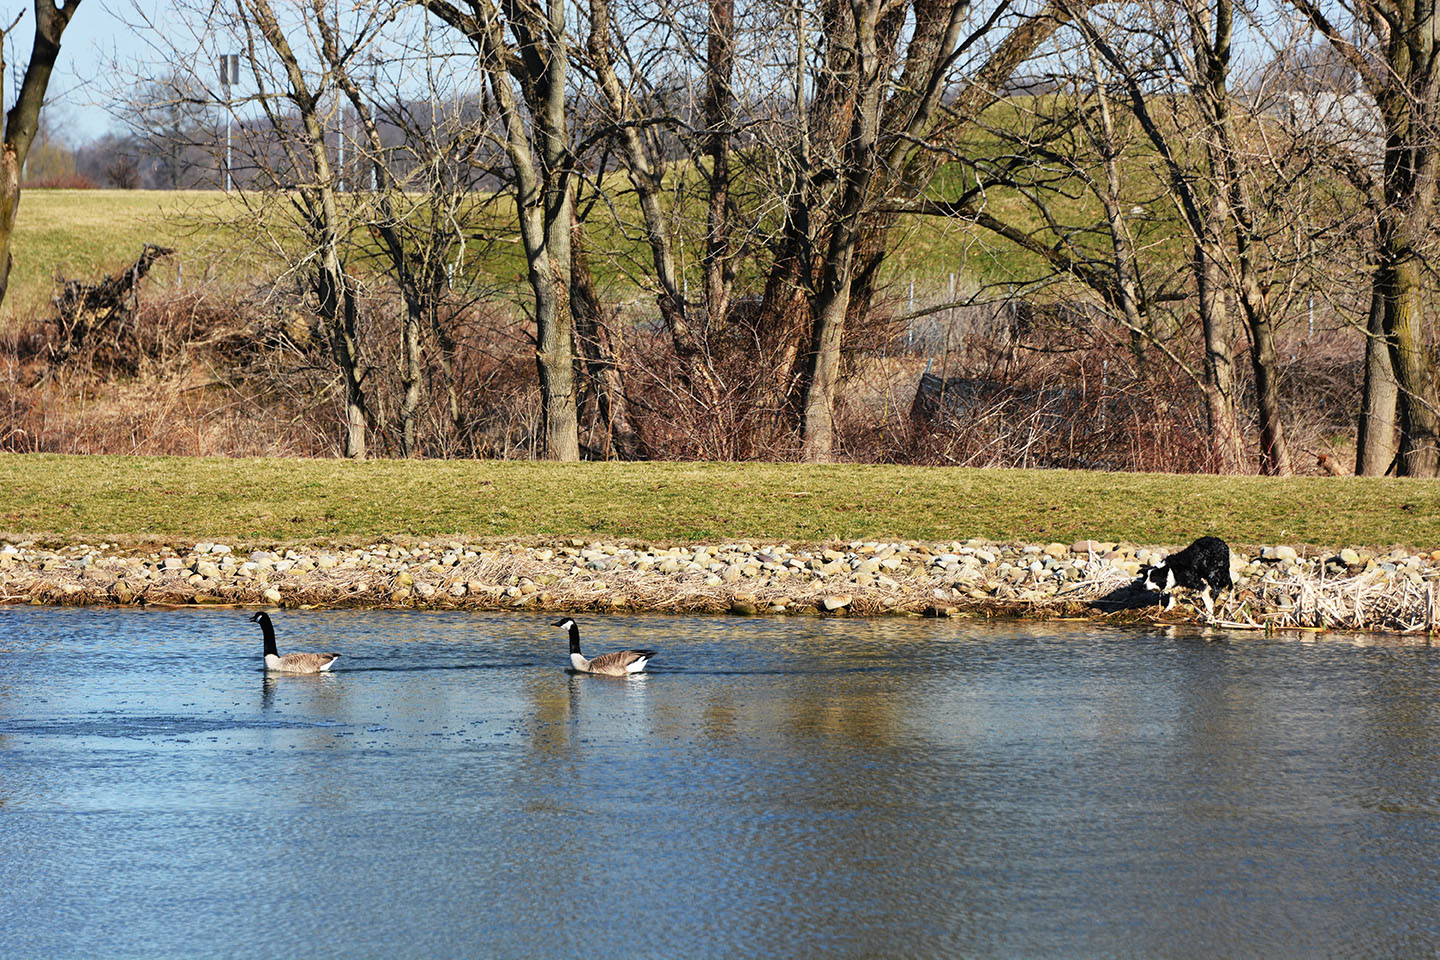 Geese Police of Western Pennsylvania PA boarder collie in action chasing problem canada geese